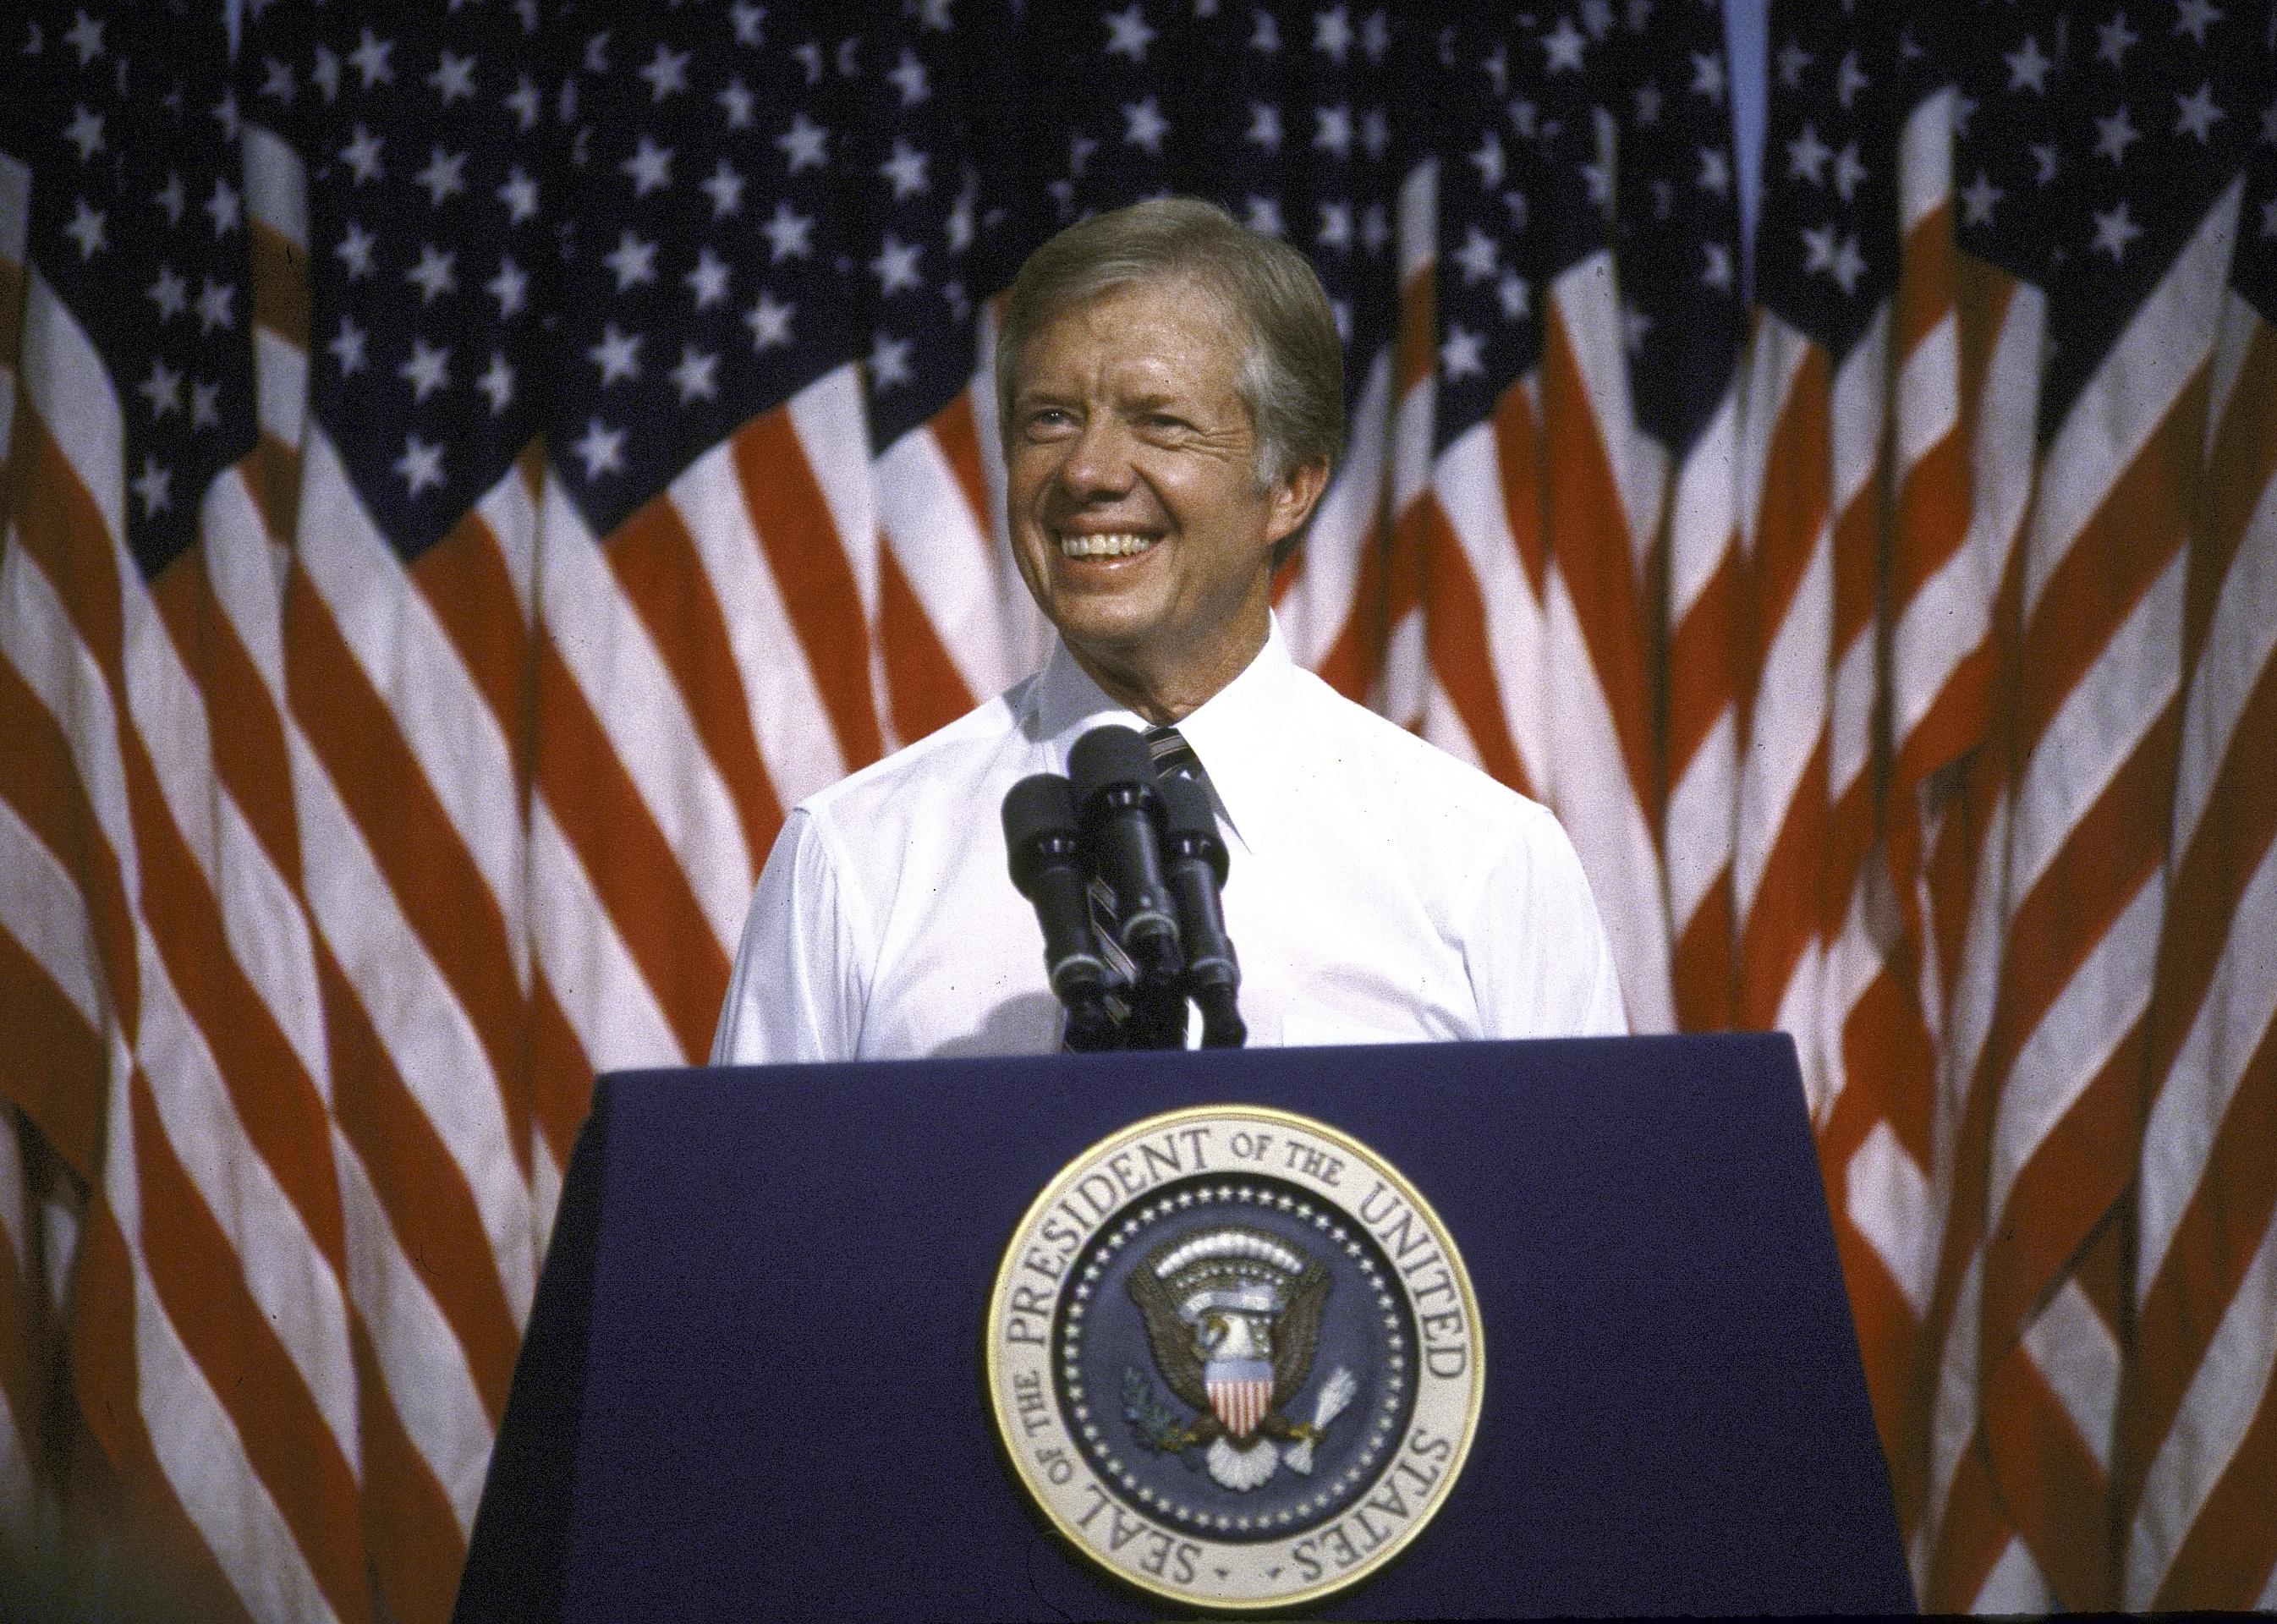 Jimmy Carter speaking at a presidential podium in front of American flags.